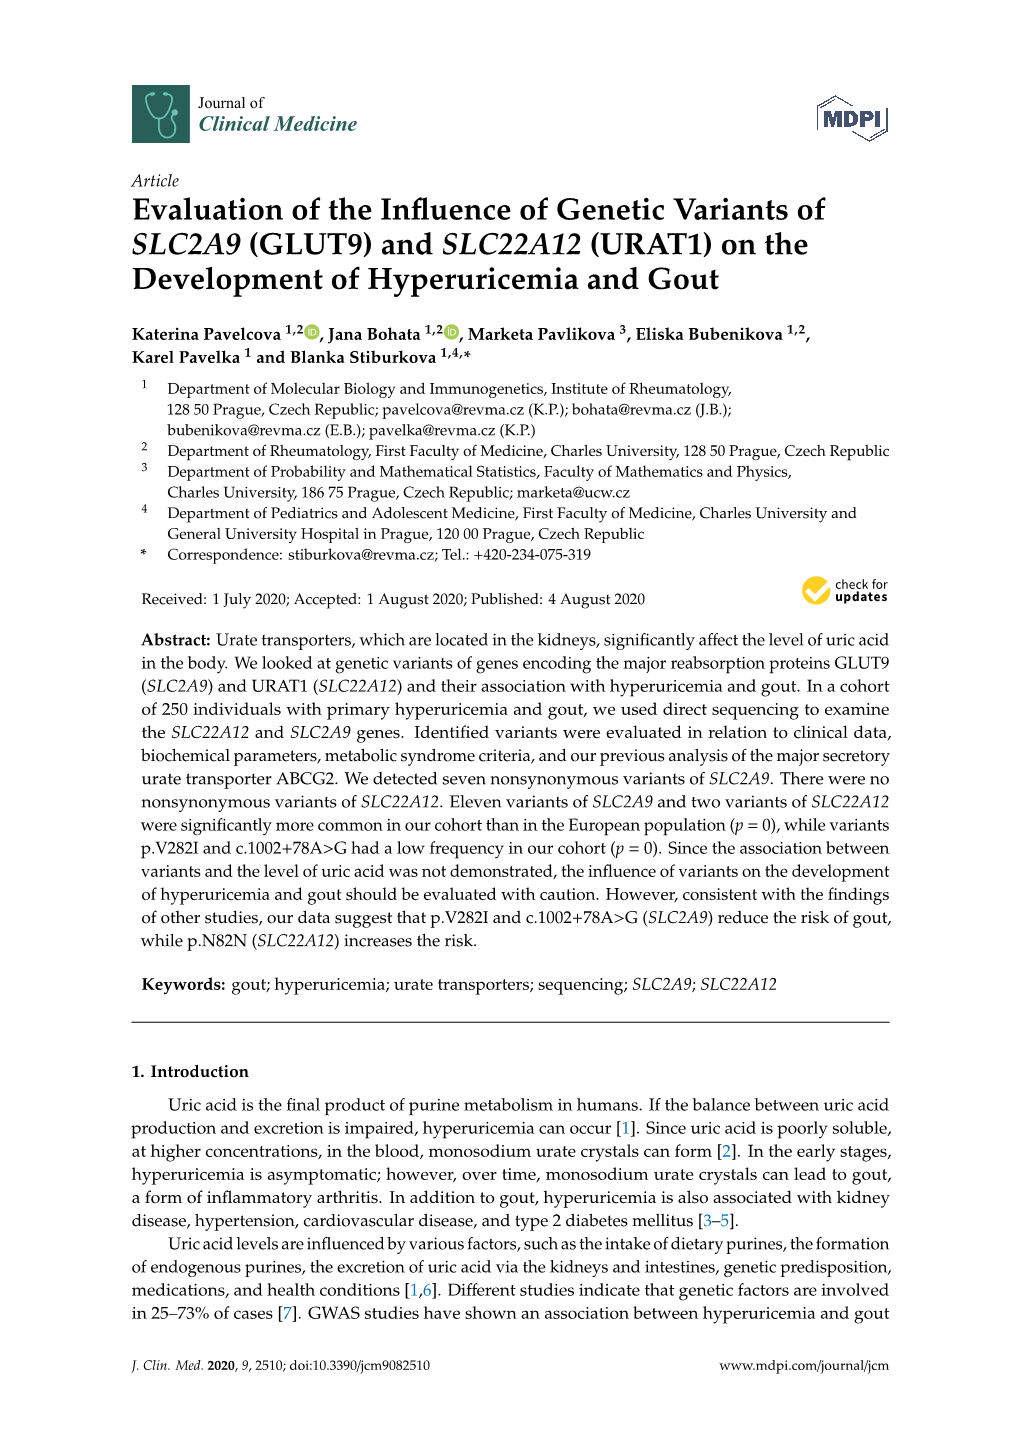 Evaluation of the Influence of Genetic Variants of SLC2A9 (GLUT9) and SLC22A12 (URAT1) on the Development of Hyperuricemia and G